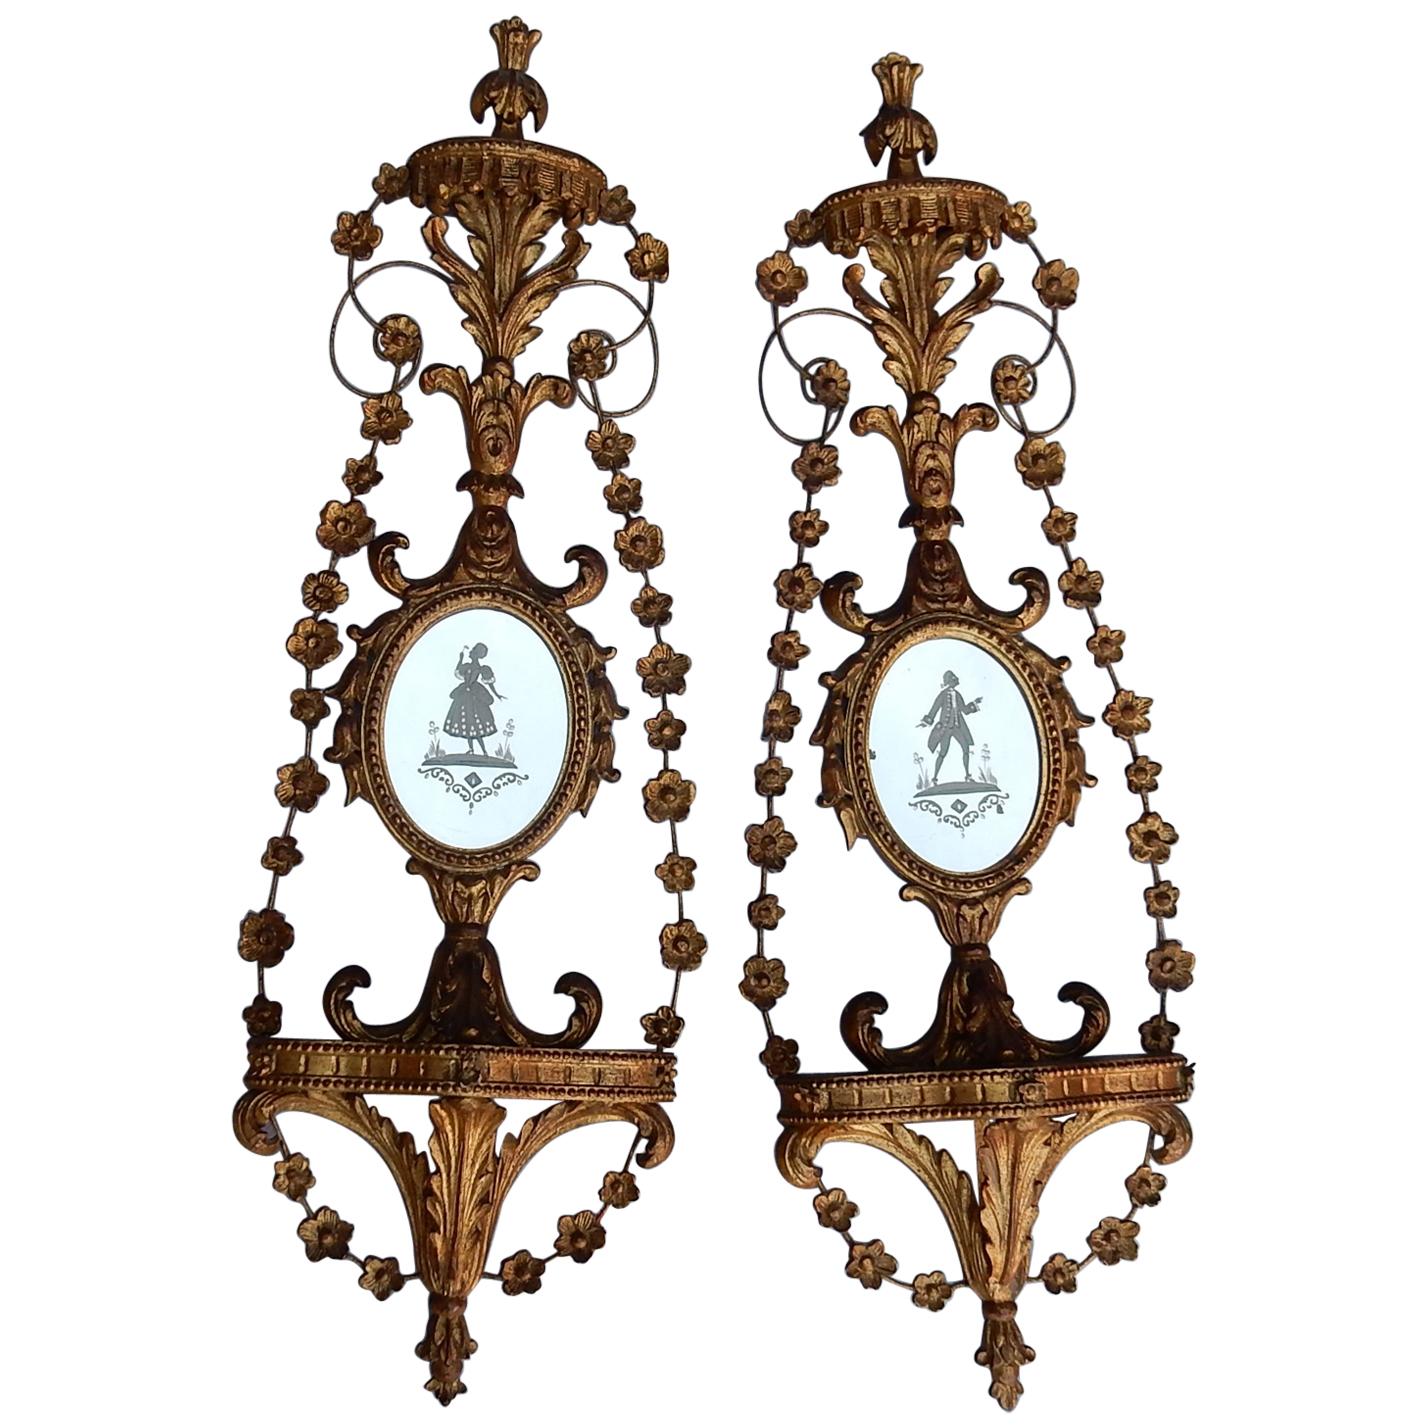 Pair of Golden Wood Wall Lamps Romantic Venice Console, Garlands, Mirrors